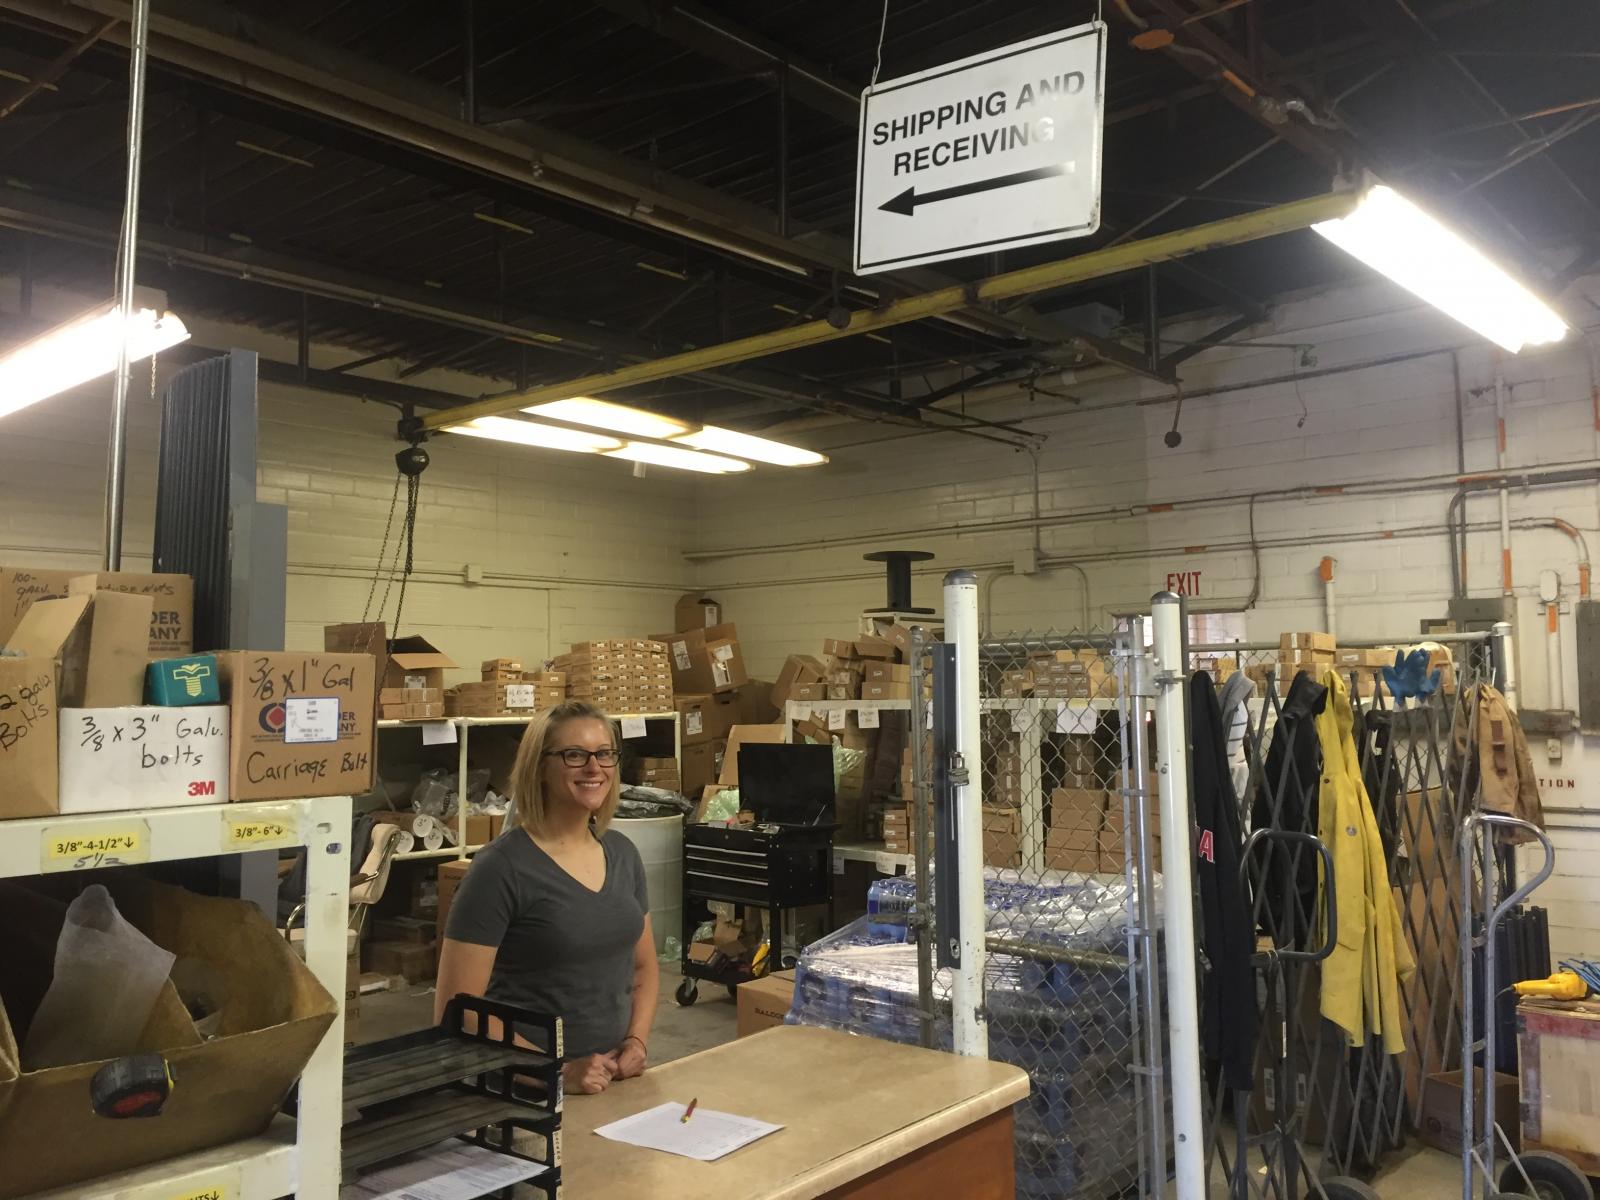 Brittany White stands behind the shipping and receiving desk at Ranco in Sioux Rapids. White, an army veteran, utilized Home Base Iowa to find employment in the region.